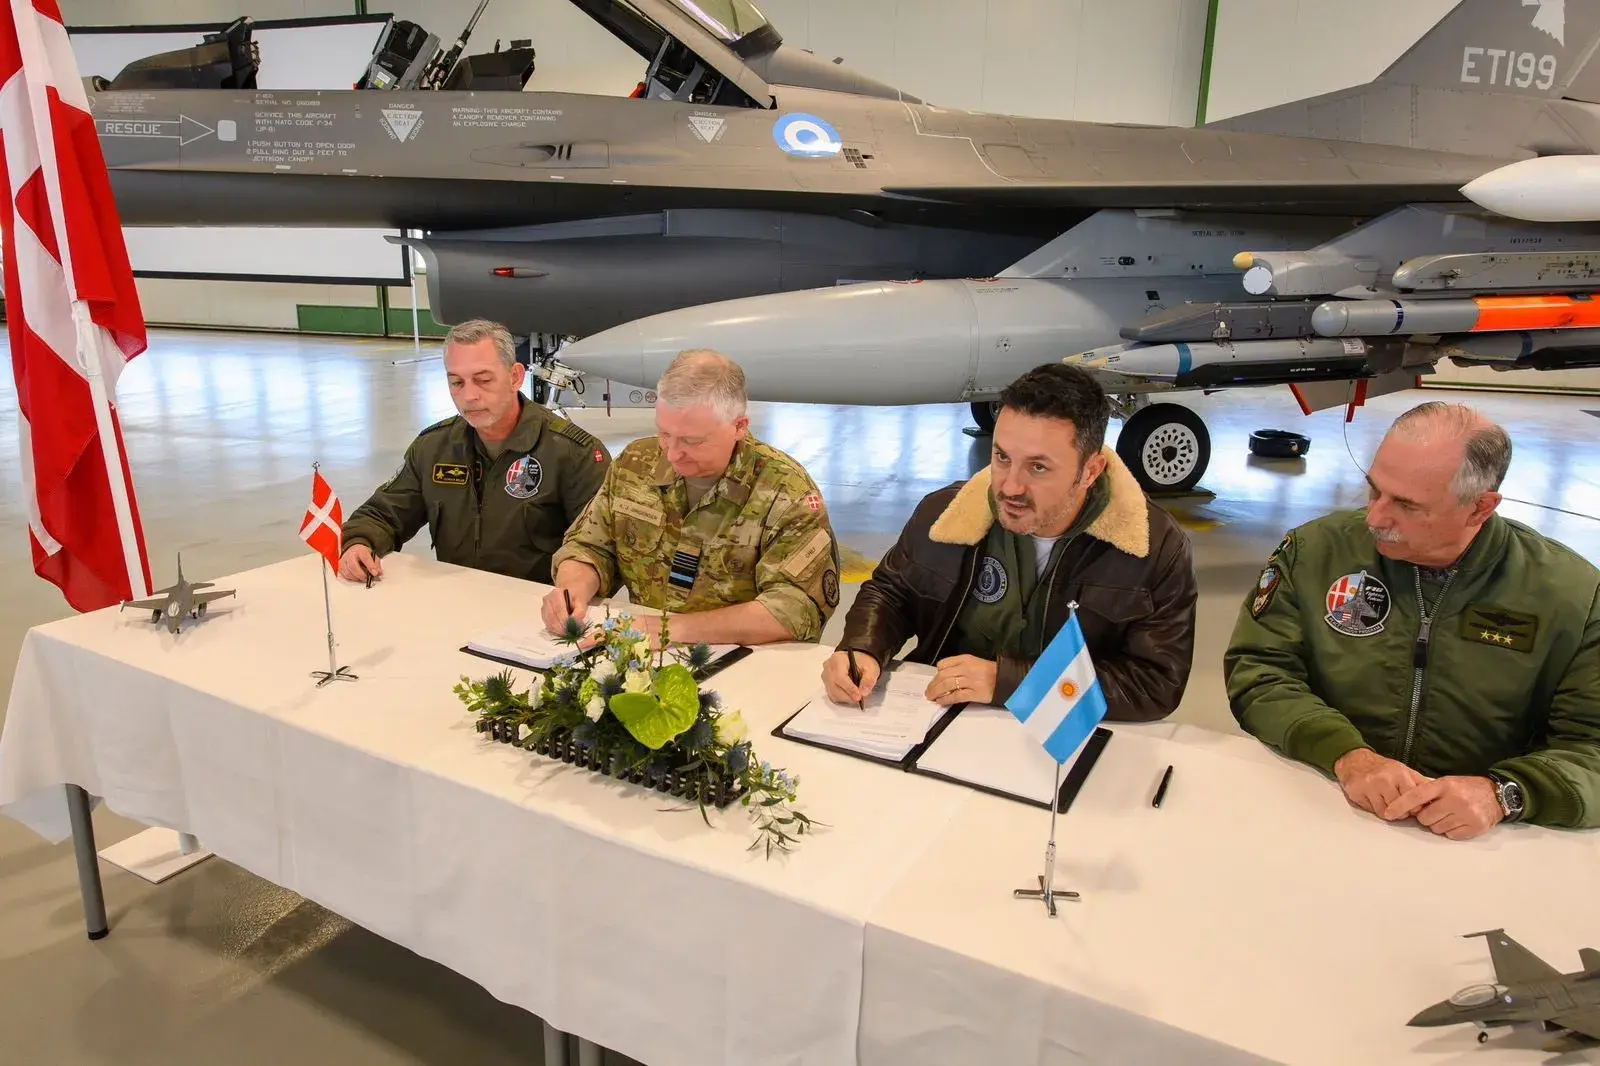 Argentine Defense Minister, Luist Petri, signing the purcharse.